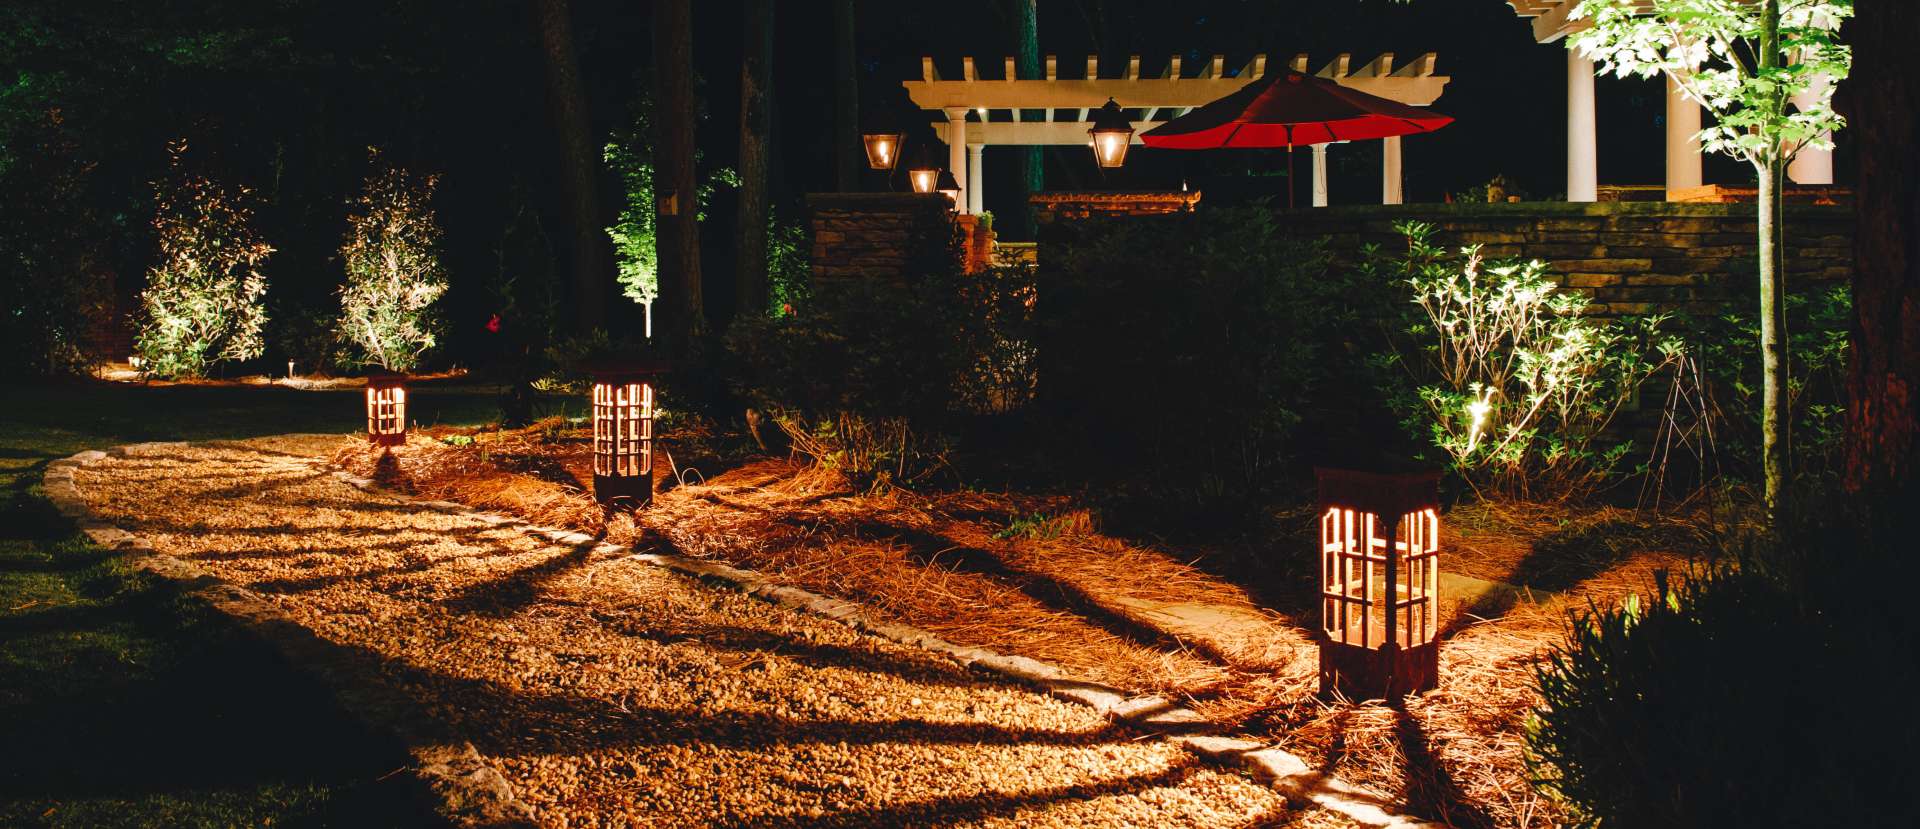 gravel pathway lighting near me in Manchester-by-the-Sea, MA.